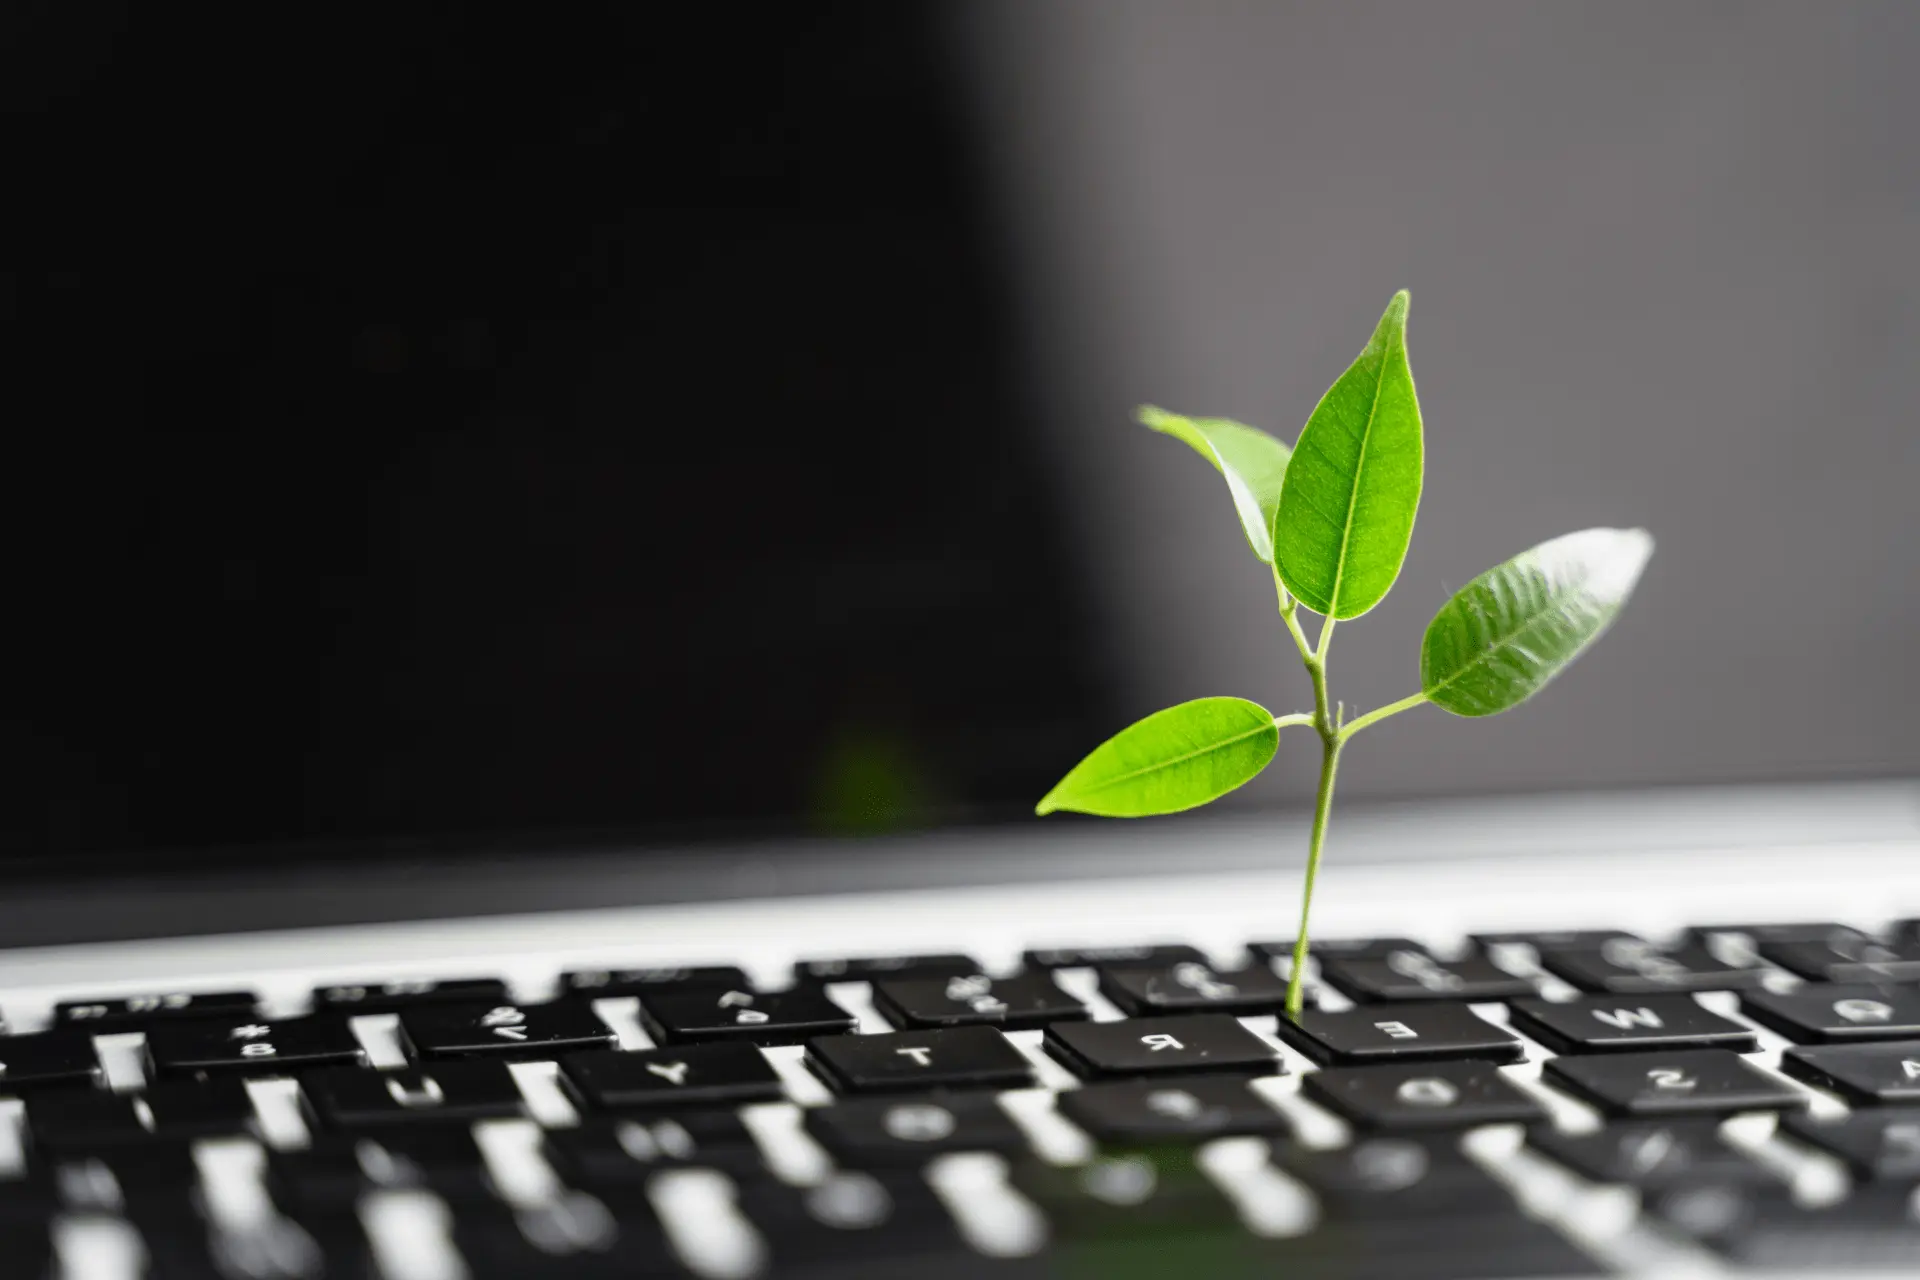 Key Strategies for Building a Sustainable and Environmentally Friendly Business